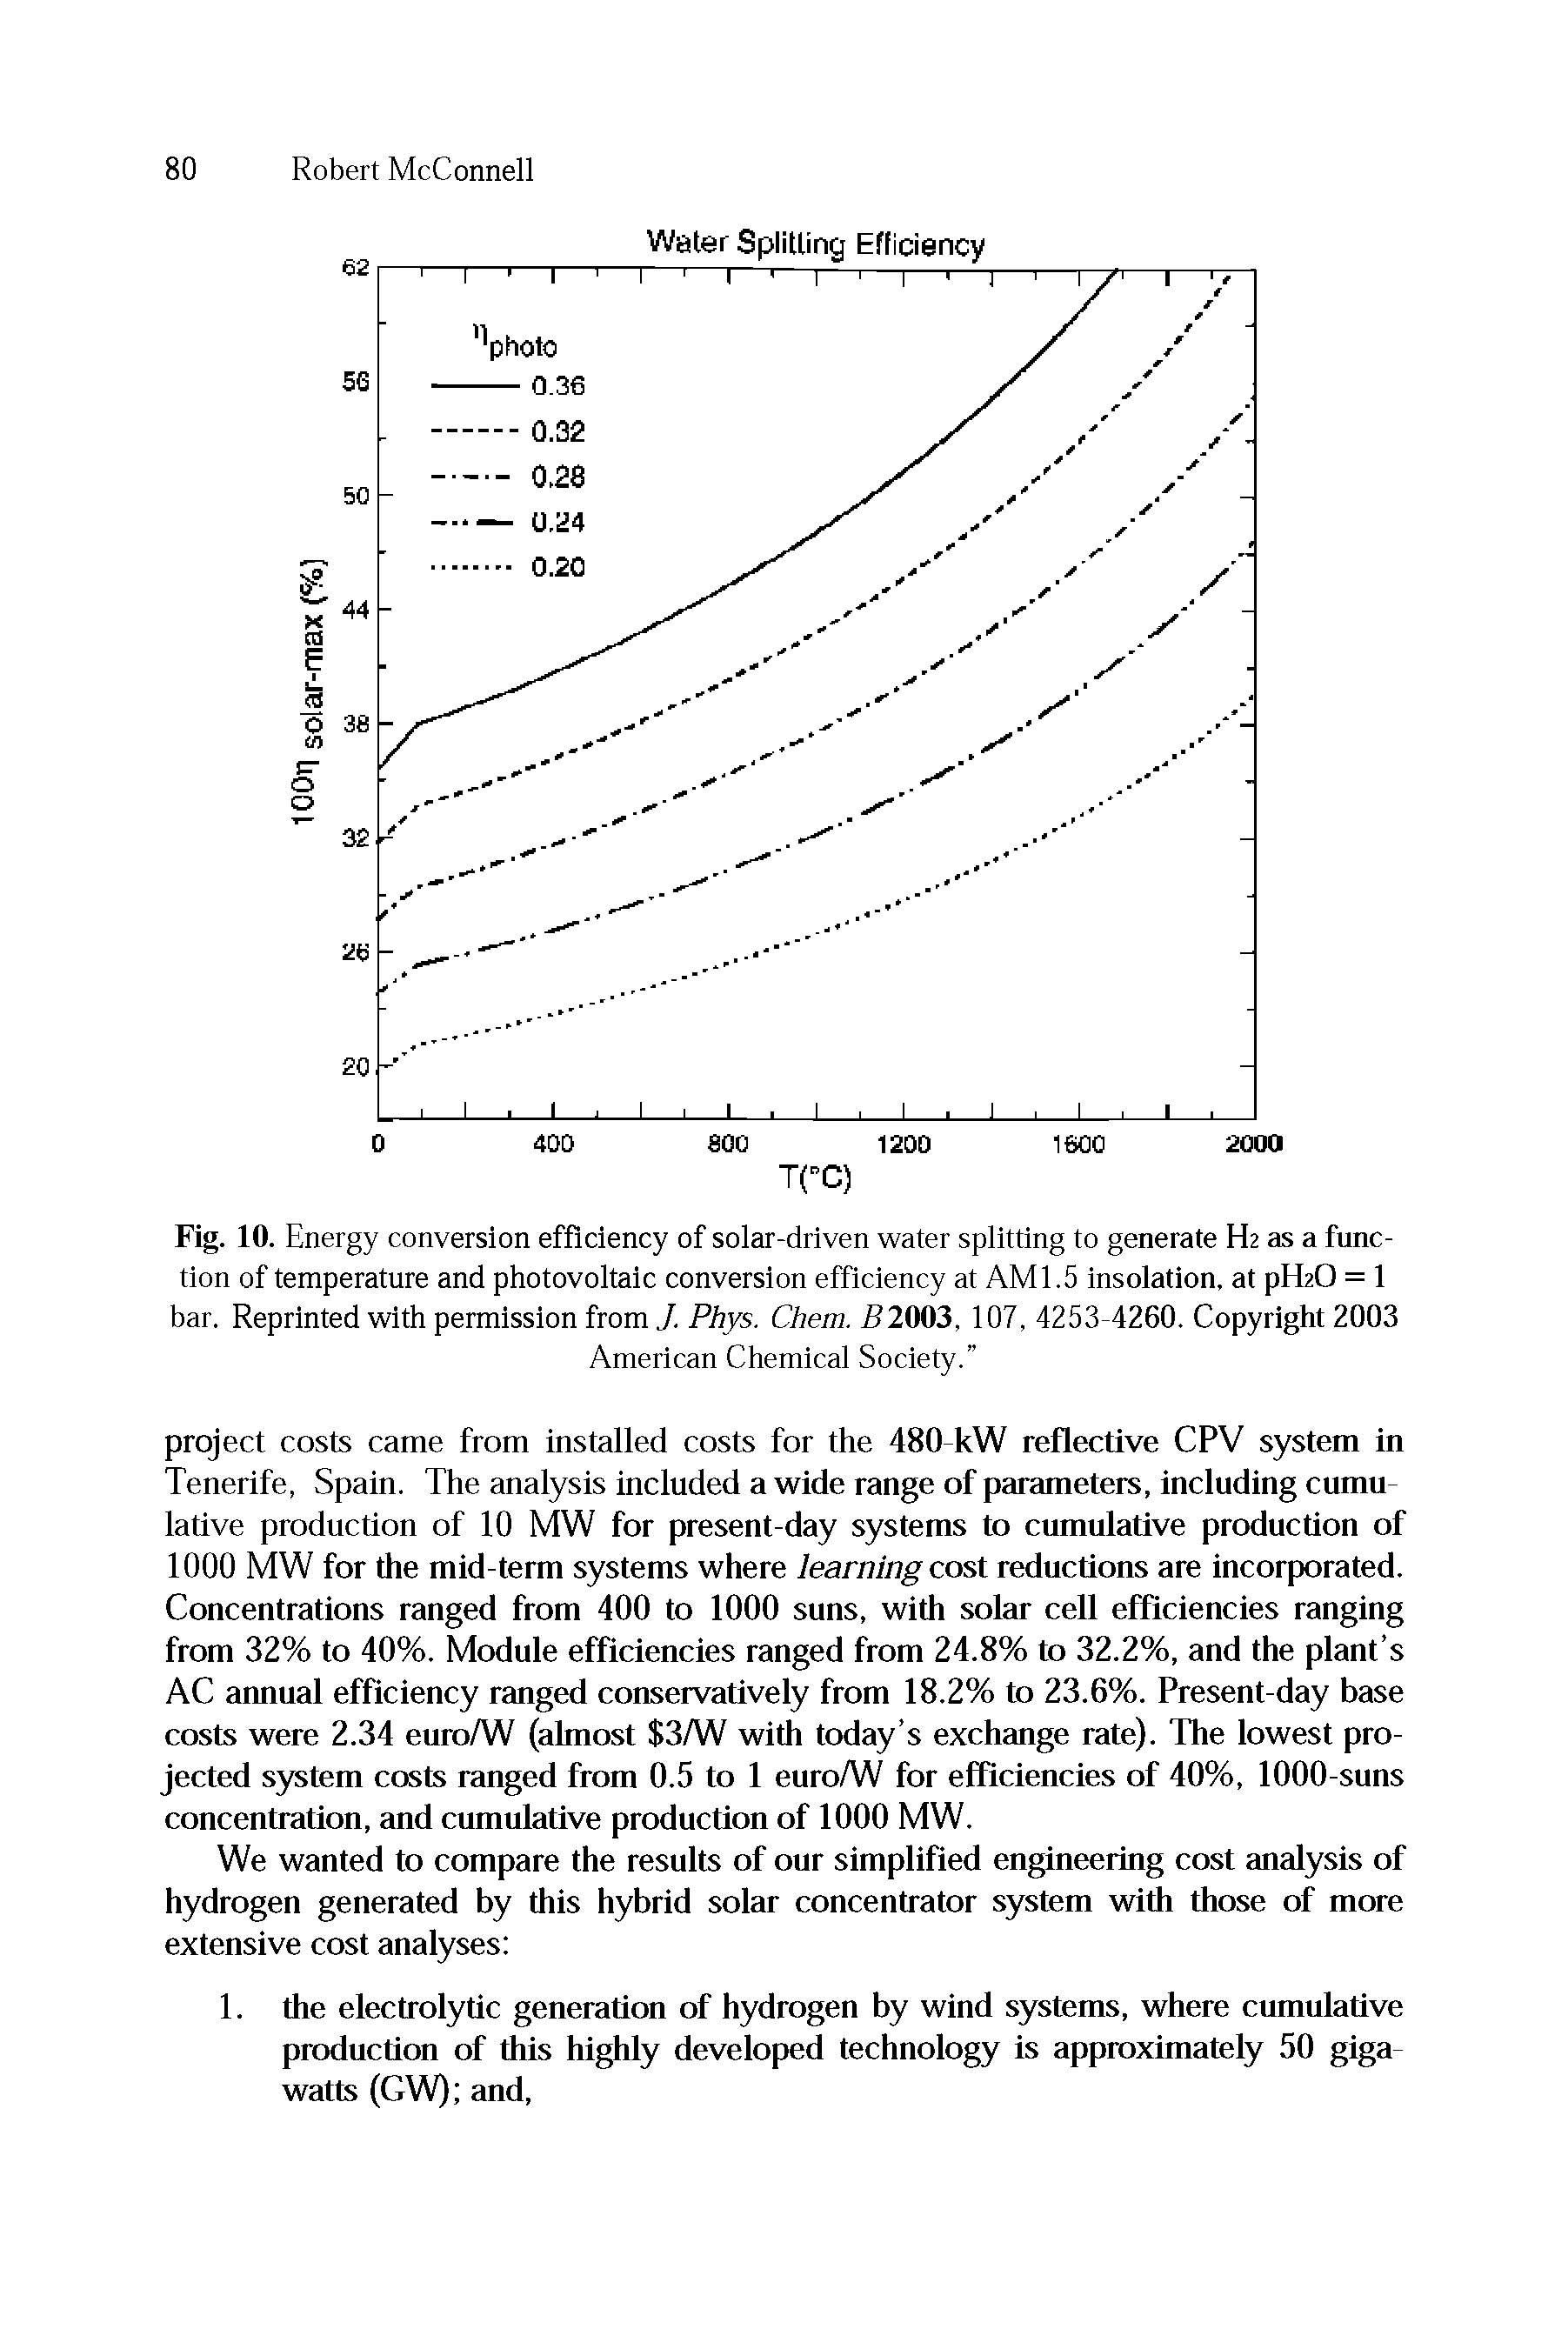 Fig. 10. Energy conversion efficiency of solar-driven water splitting to generate H2 as a function of temperature and photovoltaic conversion efficiency at AMI.5 insolation, at pfhO = 1 bar. Reprinted with permission from J. Phys. Chem. 52003, 107, 4253-4260. Copyright 2003...